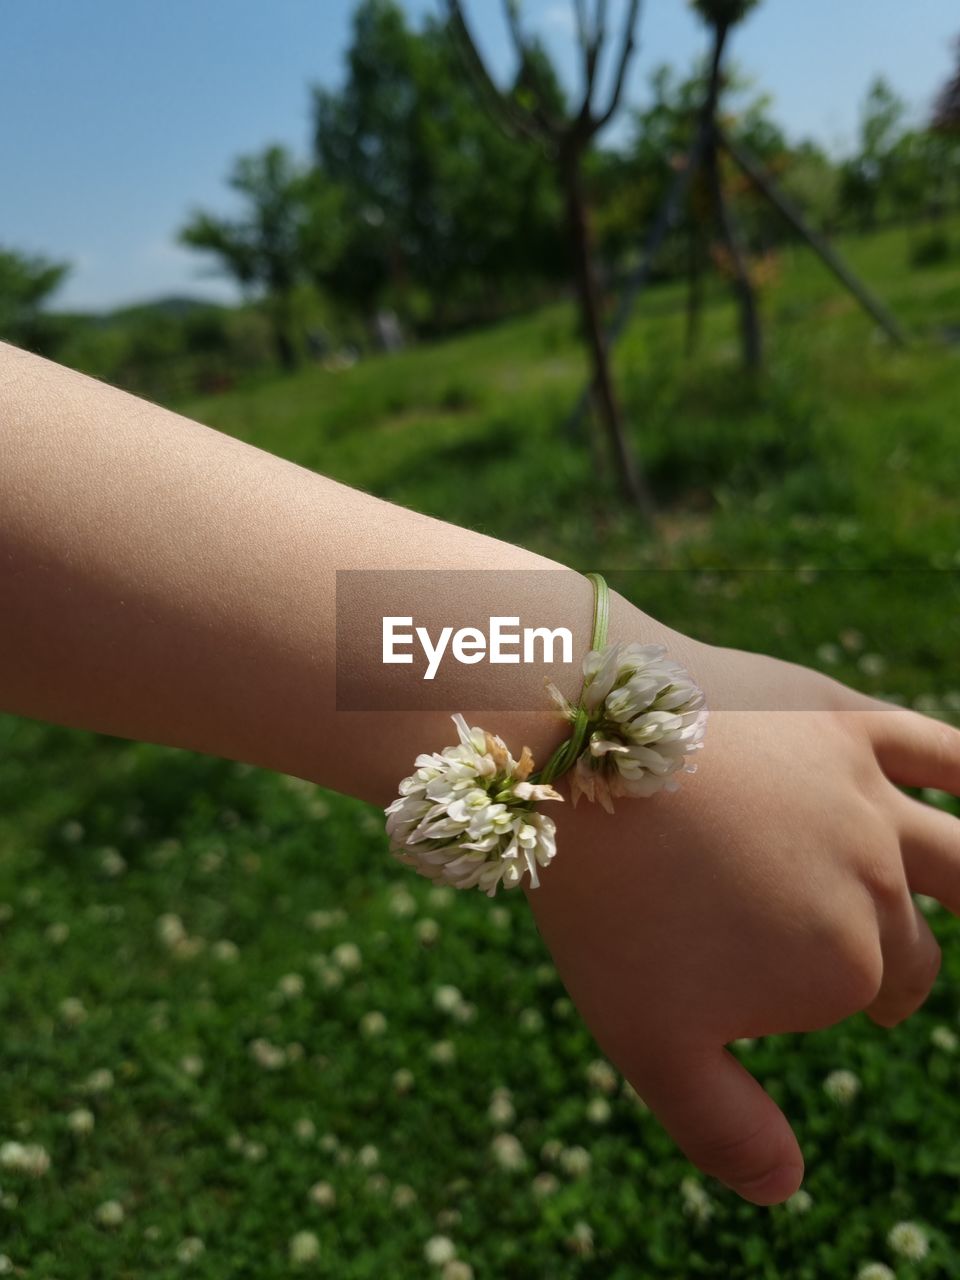 green, plant, hand, one person, adult, women, grass, flower, nature, focus on foreground, finger, close-up, limb, yellow, human limb, fashion accessory, day, holding, flowering plant, outdoors, lifestyles, jewelry, tree, celebration, ring